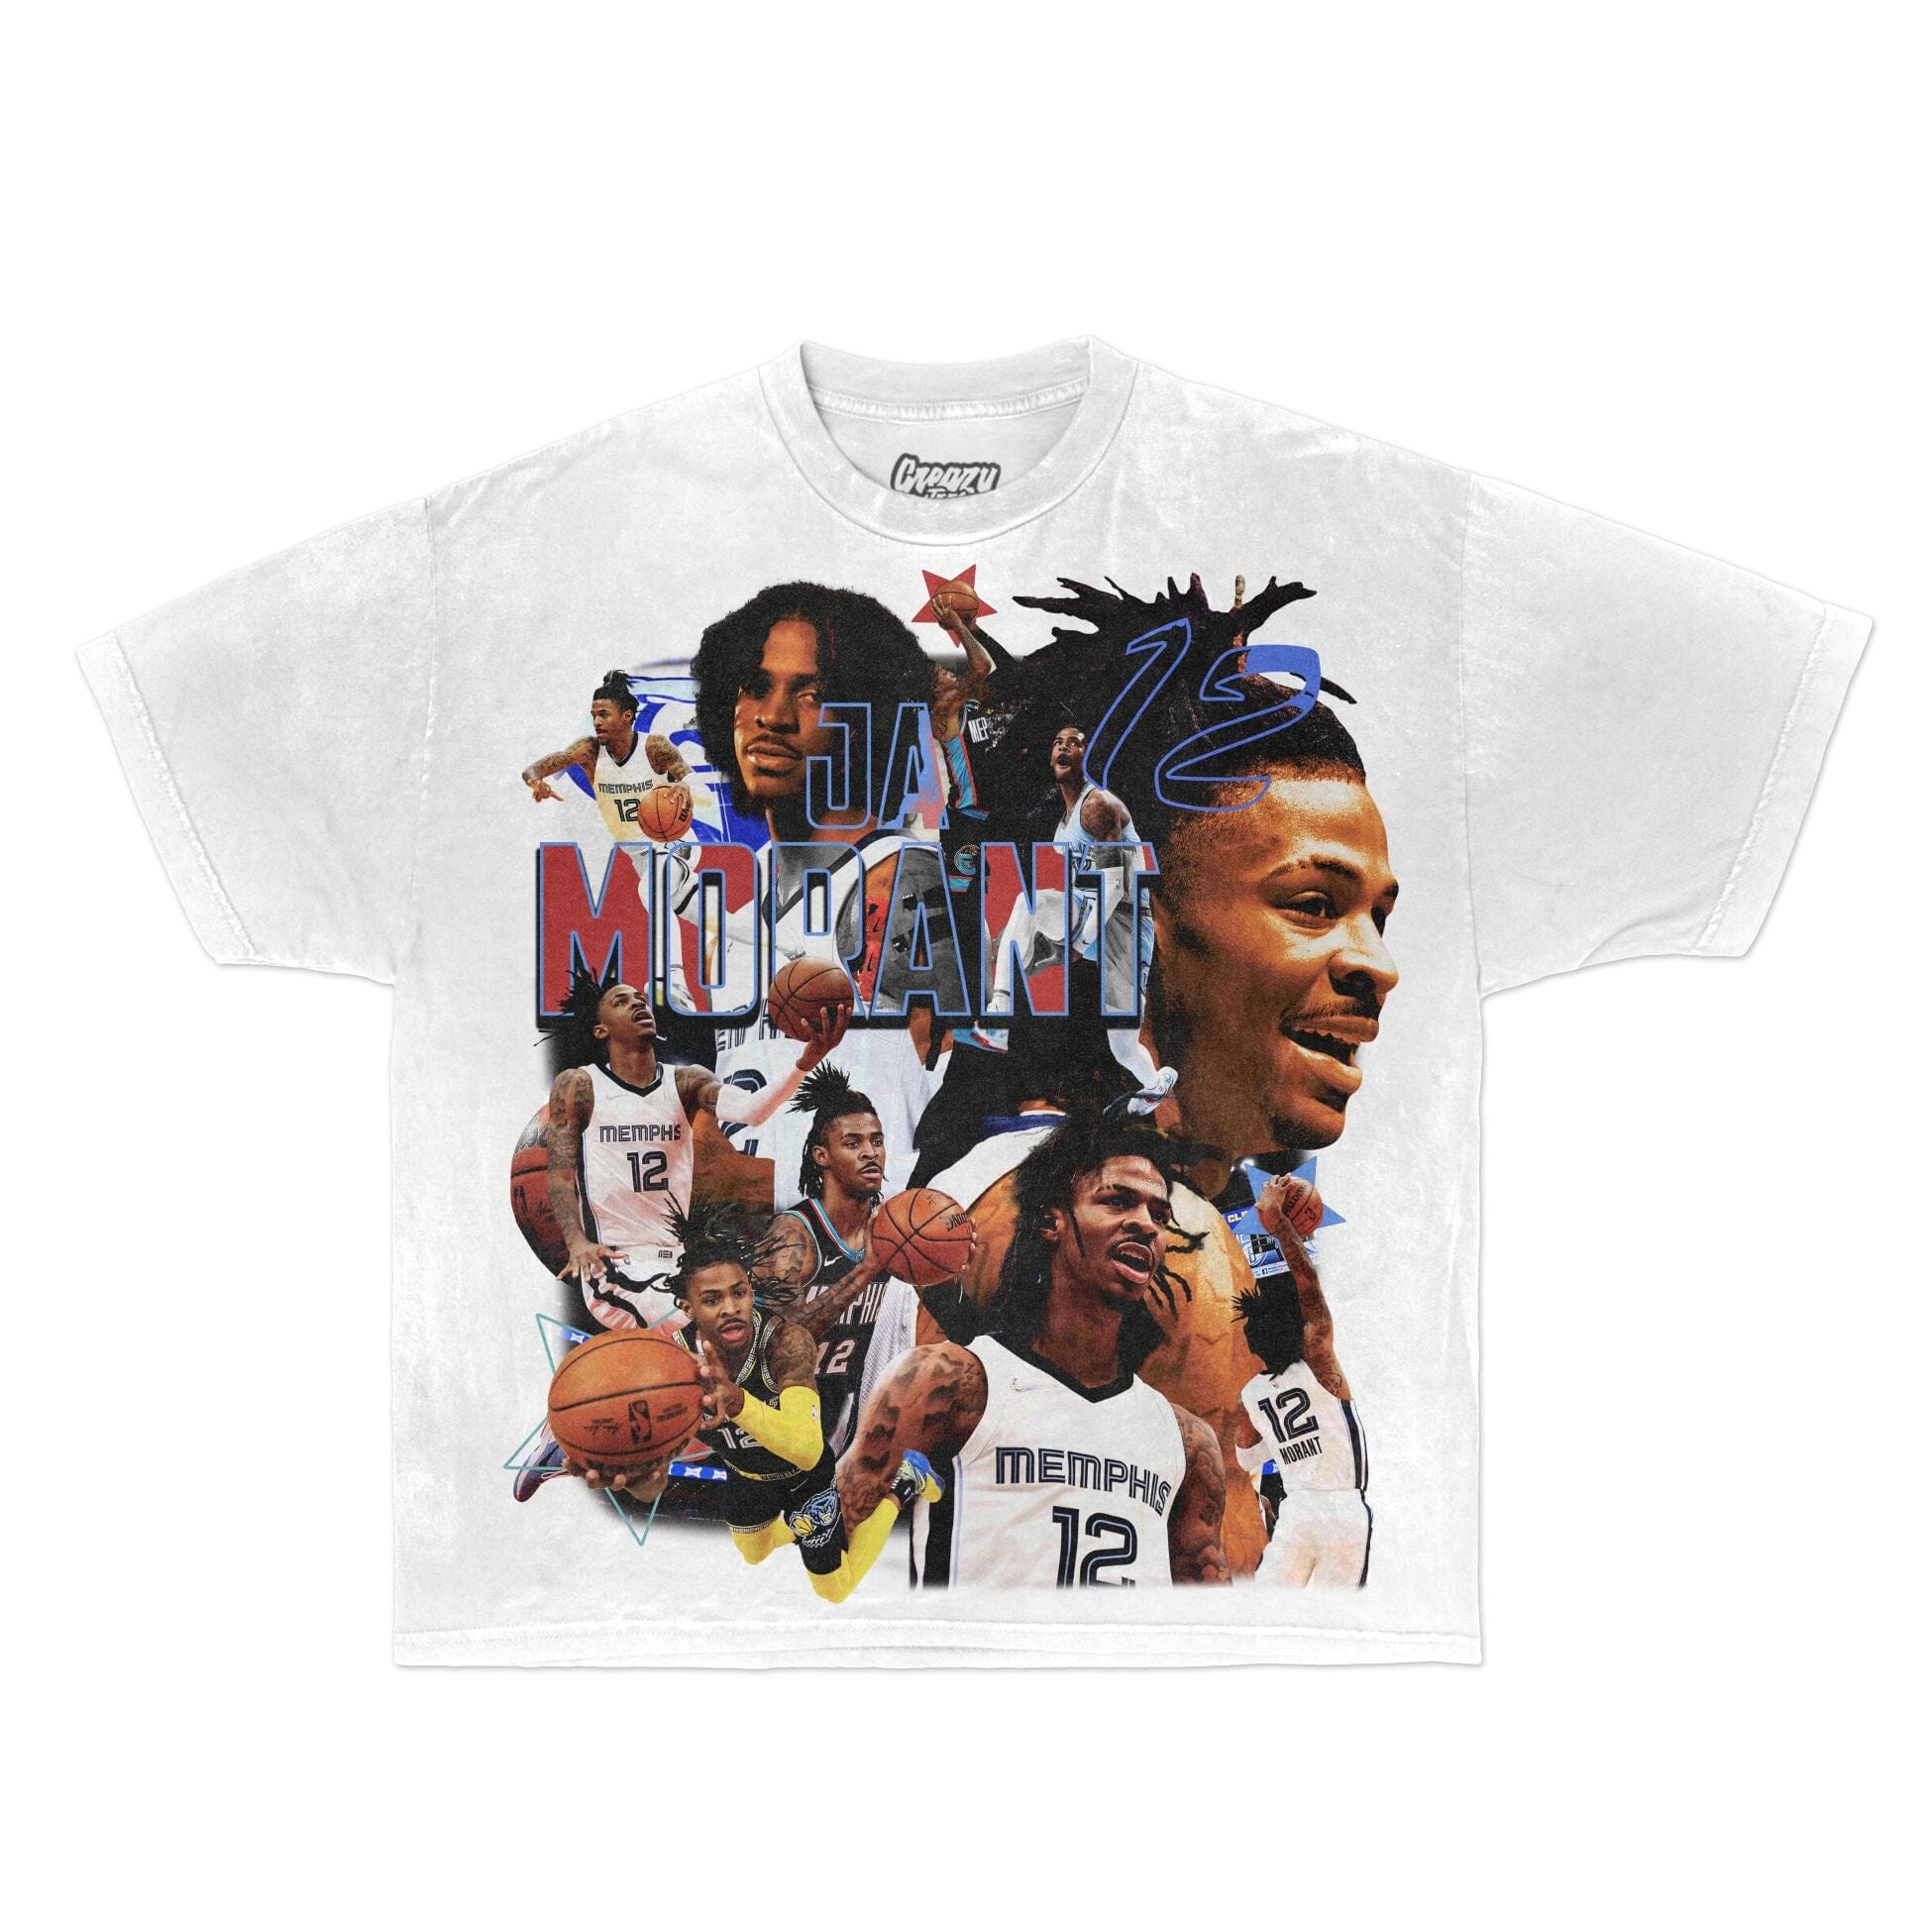 Ja Morant Too Small Essential T-Shirt for Sale by RatTrapTees